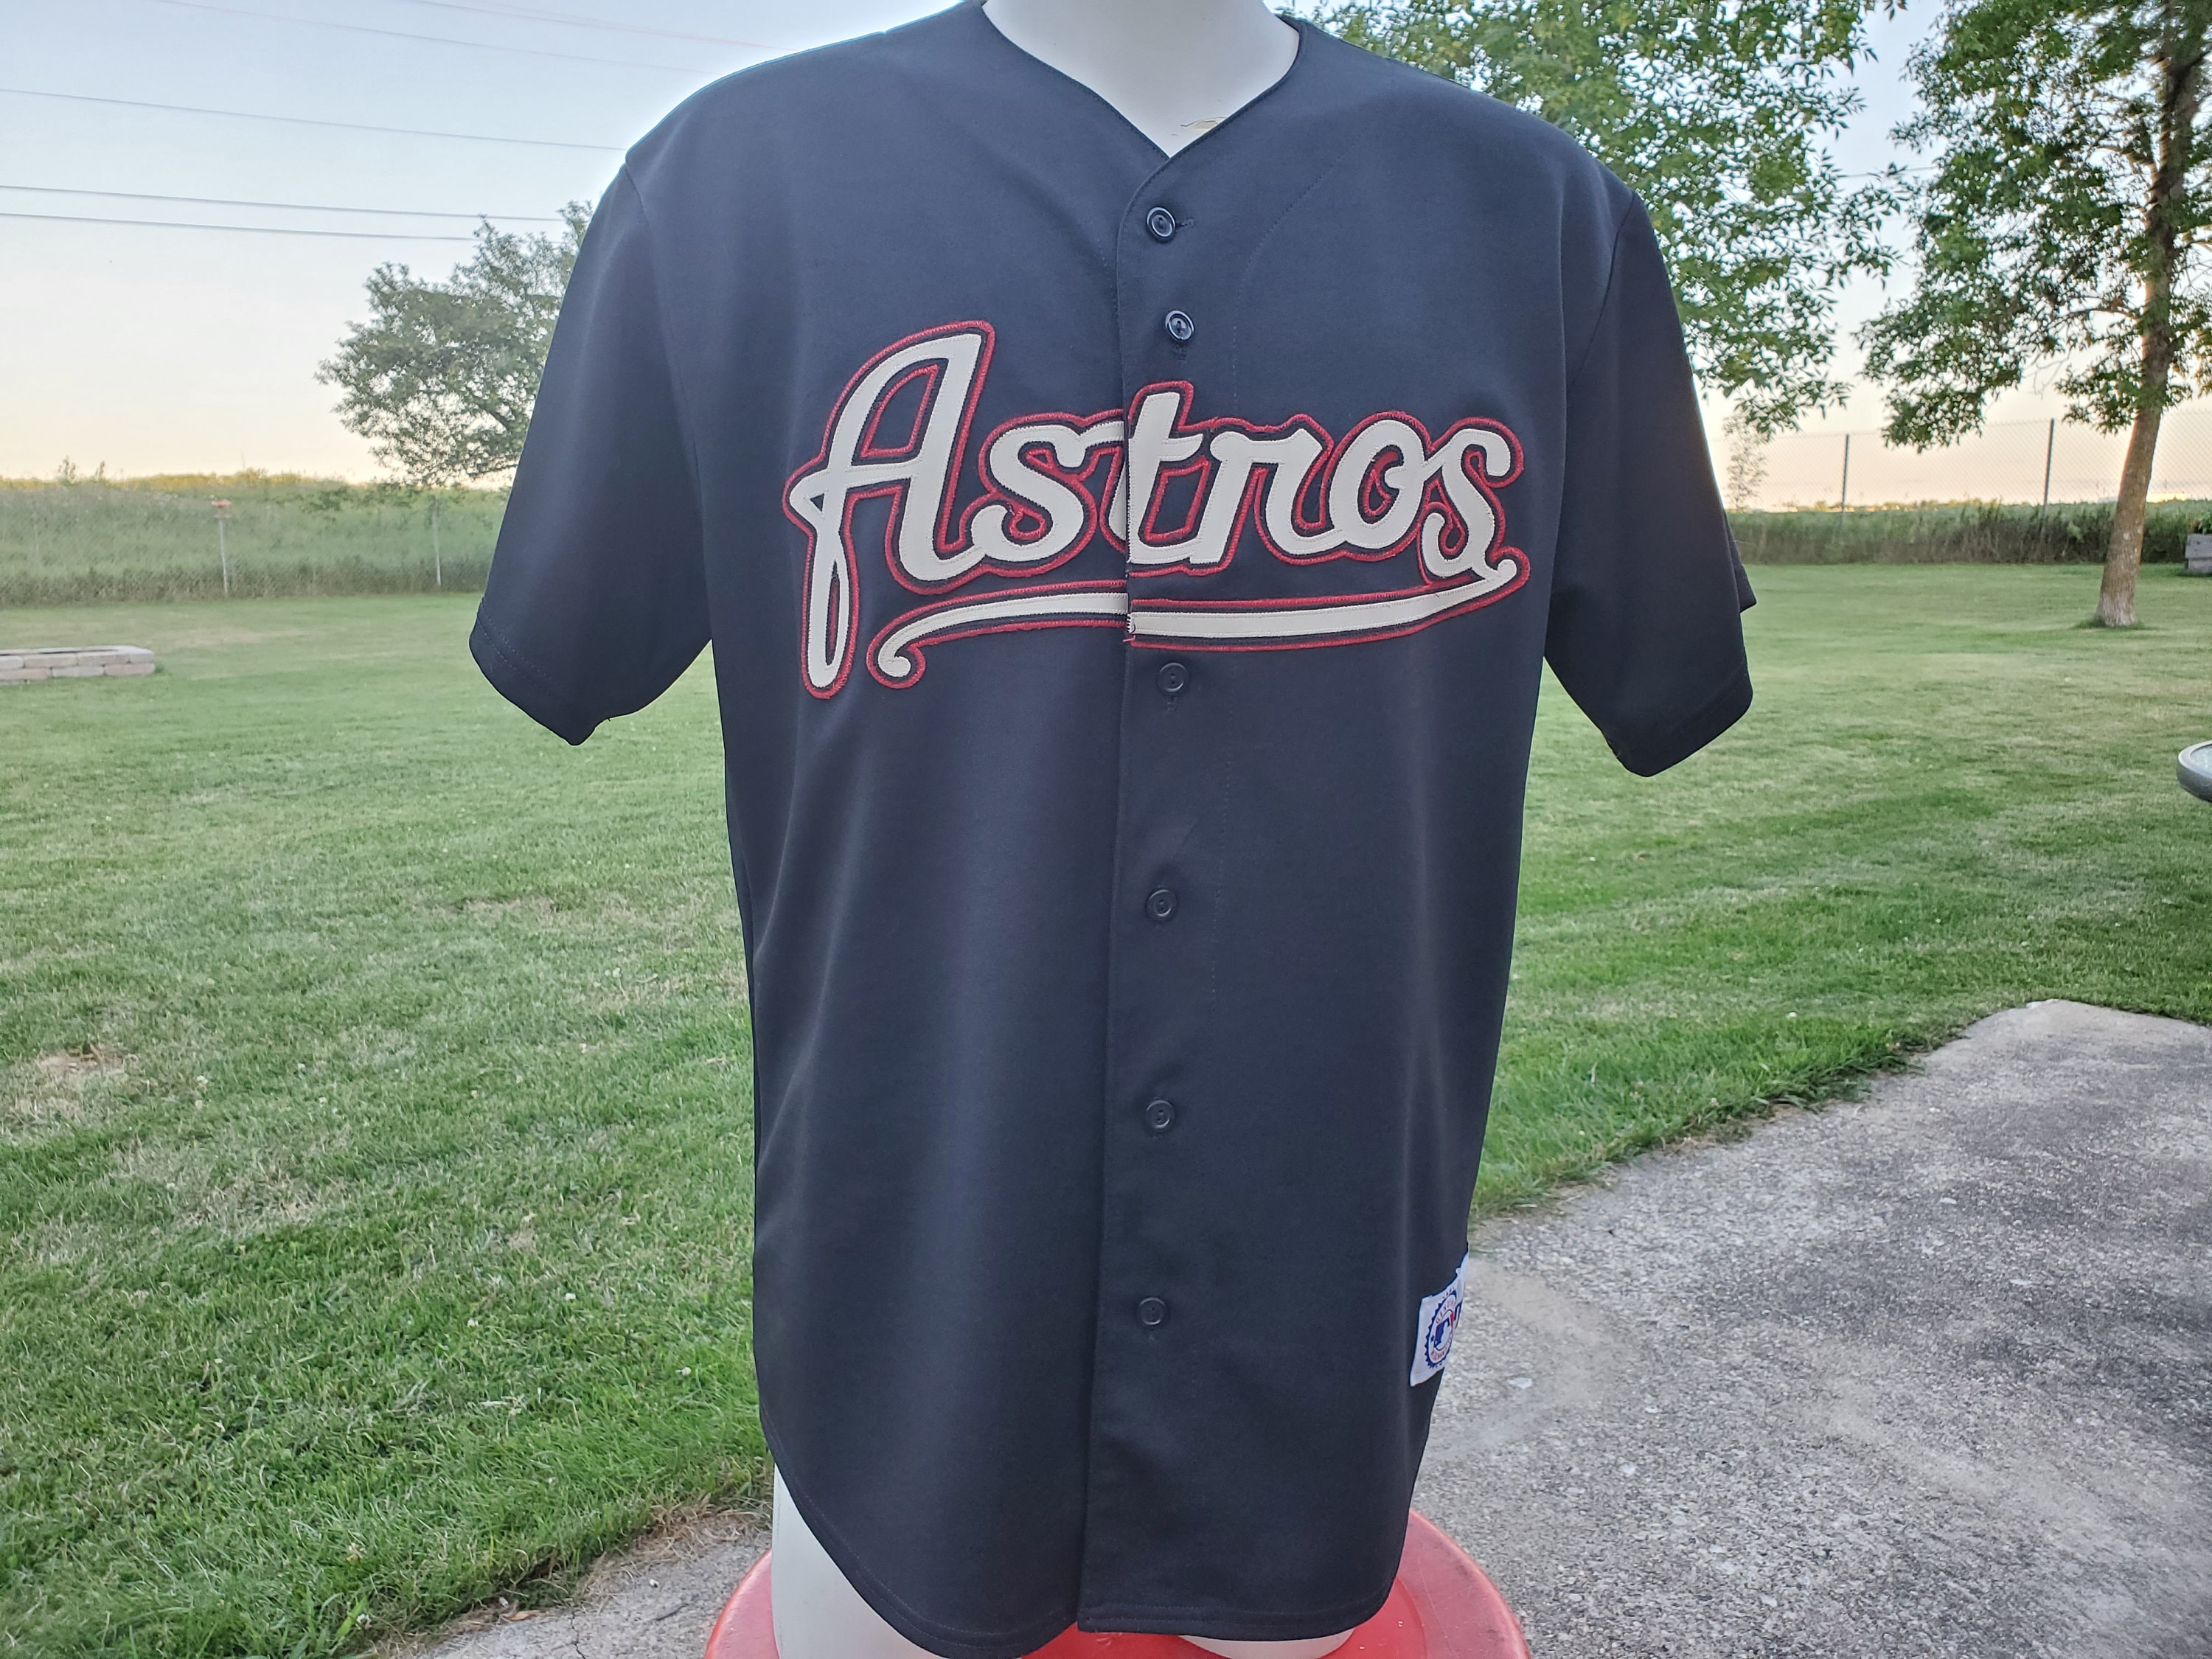 astros jersey red